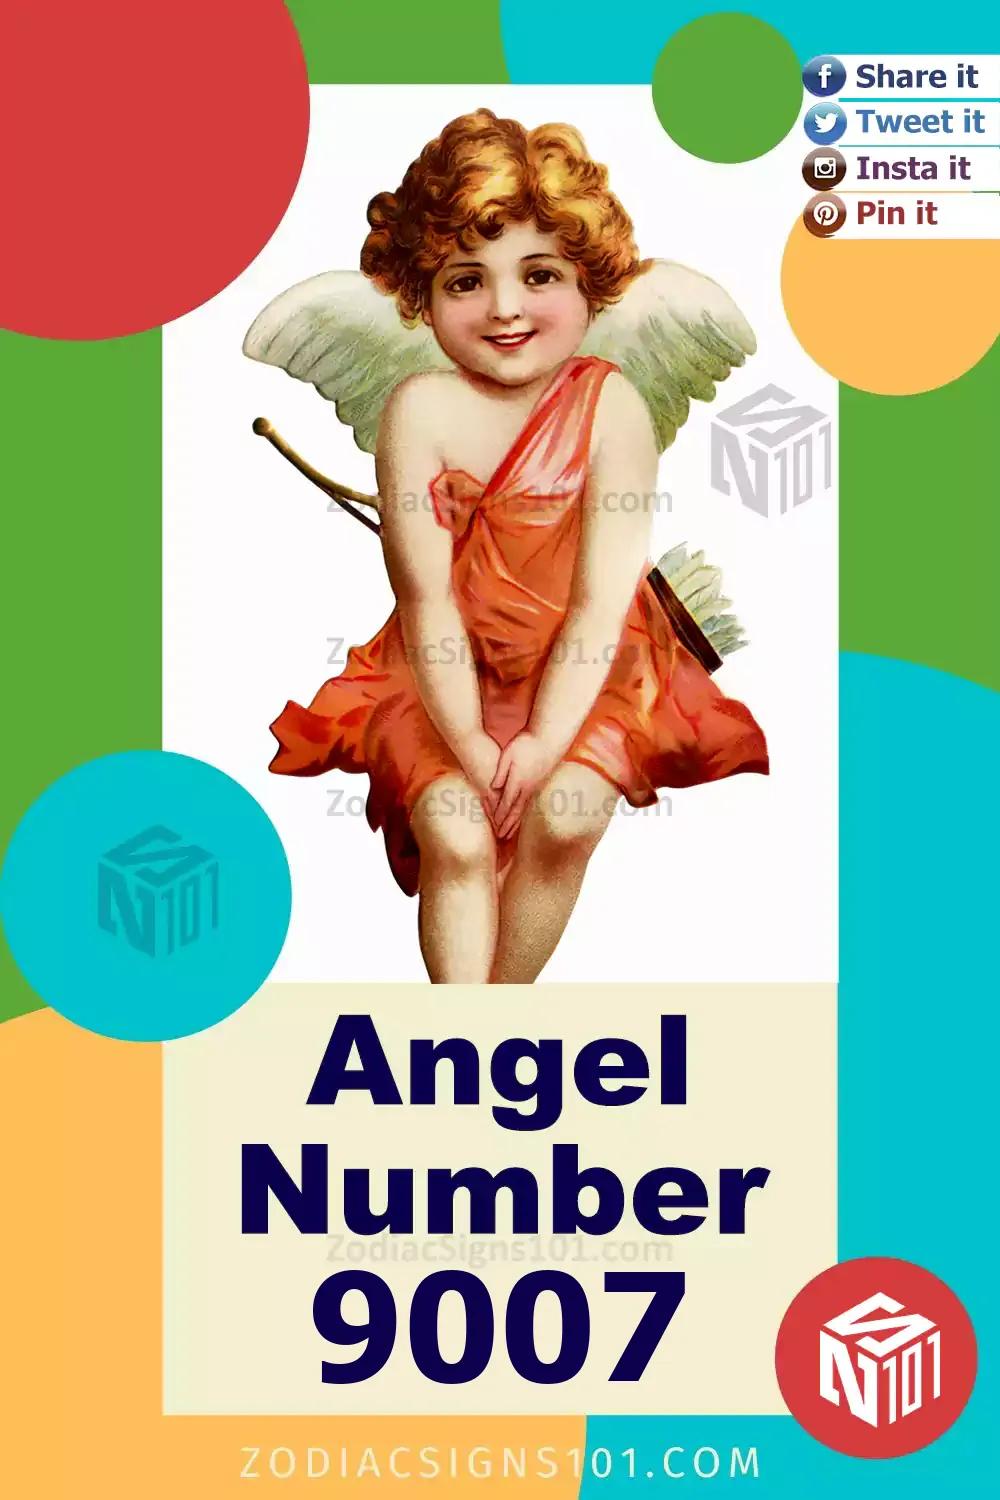 9007 Angel Number Meaning